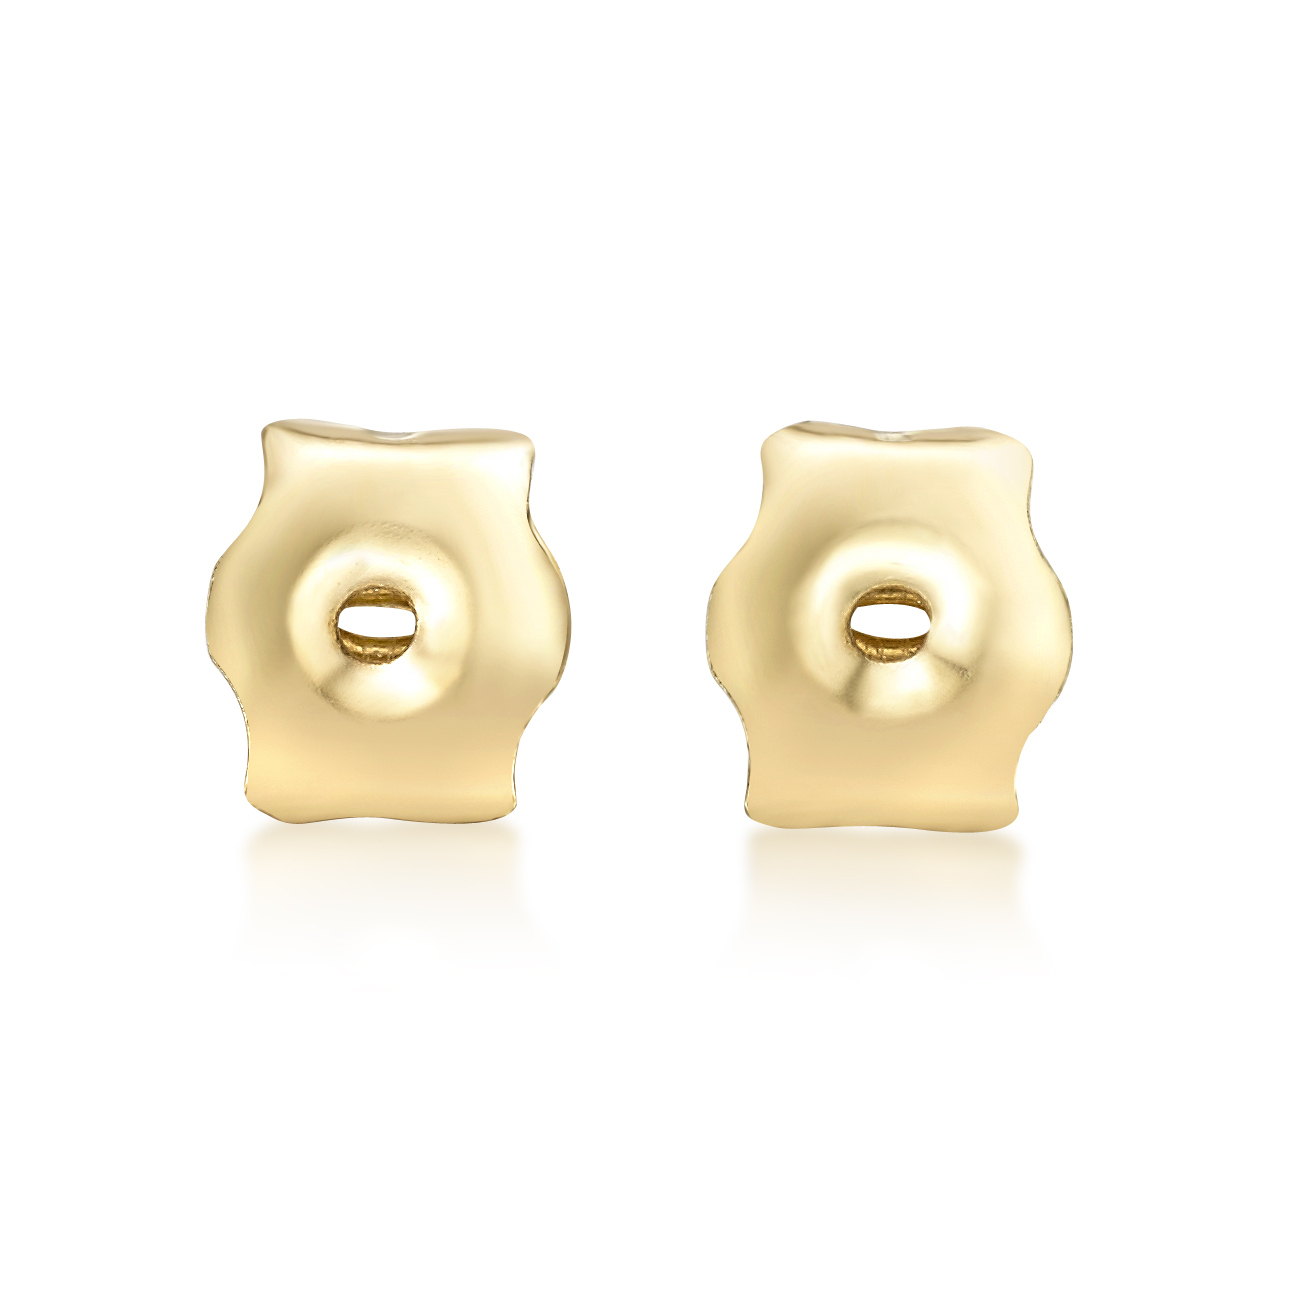 Women's Replacement Friction Earring Backs, 10K Yellow Gold, 1 Pair (2 Total) | Lavari Jewelers